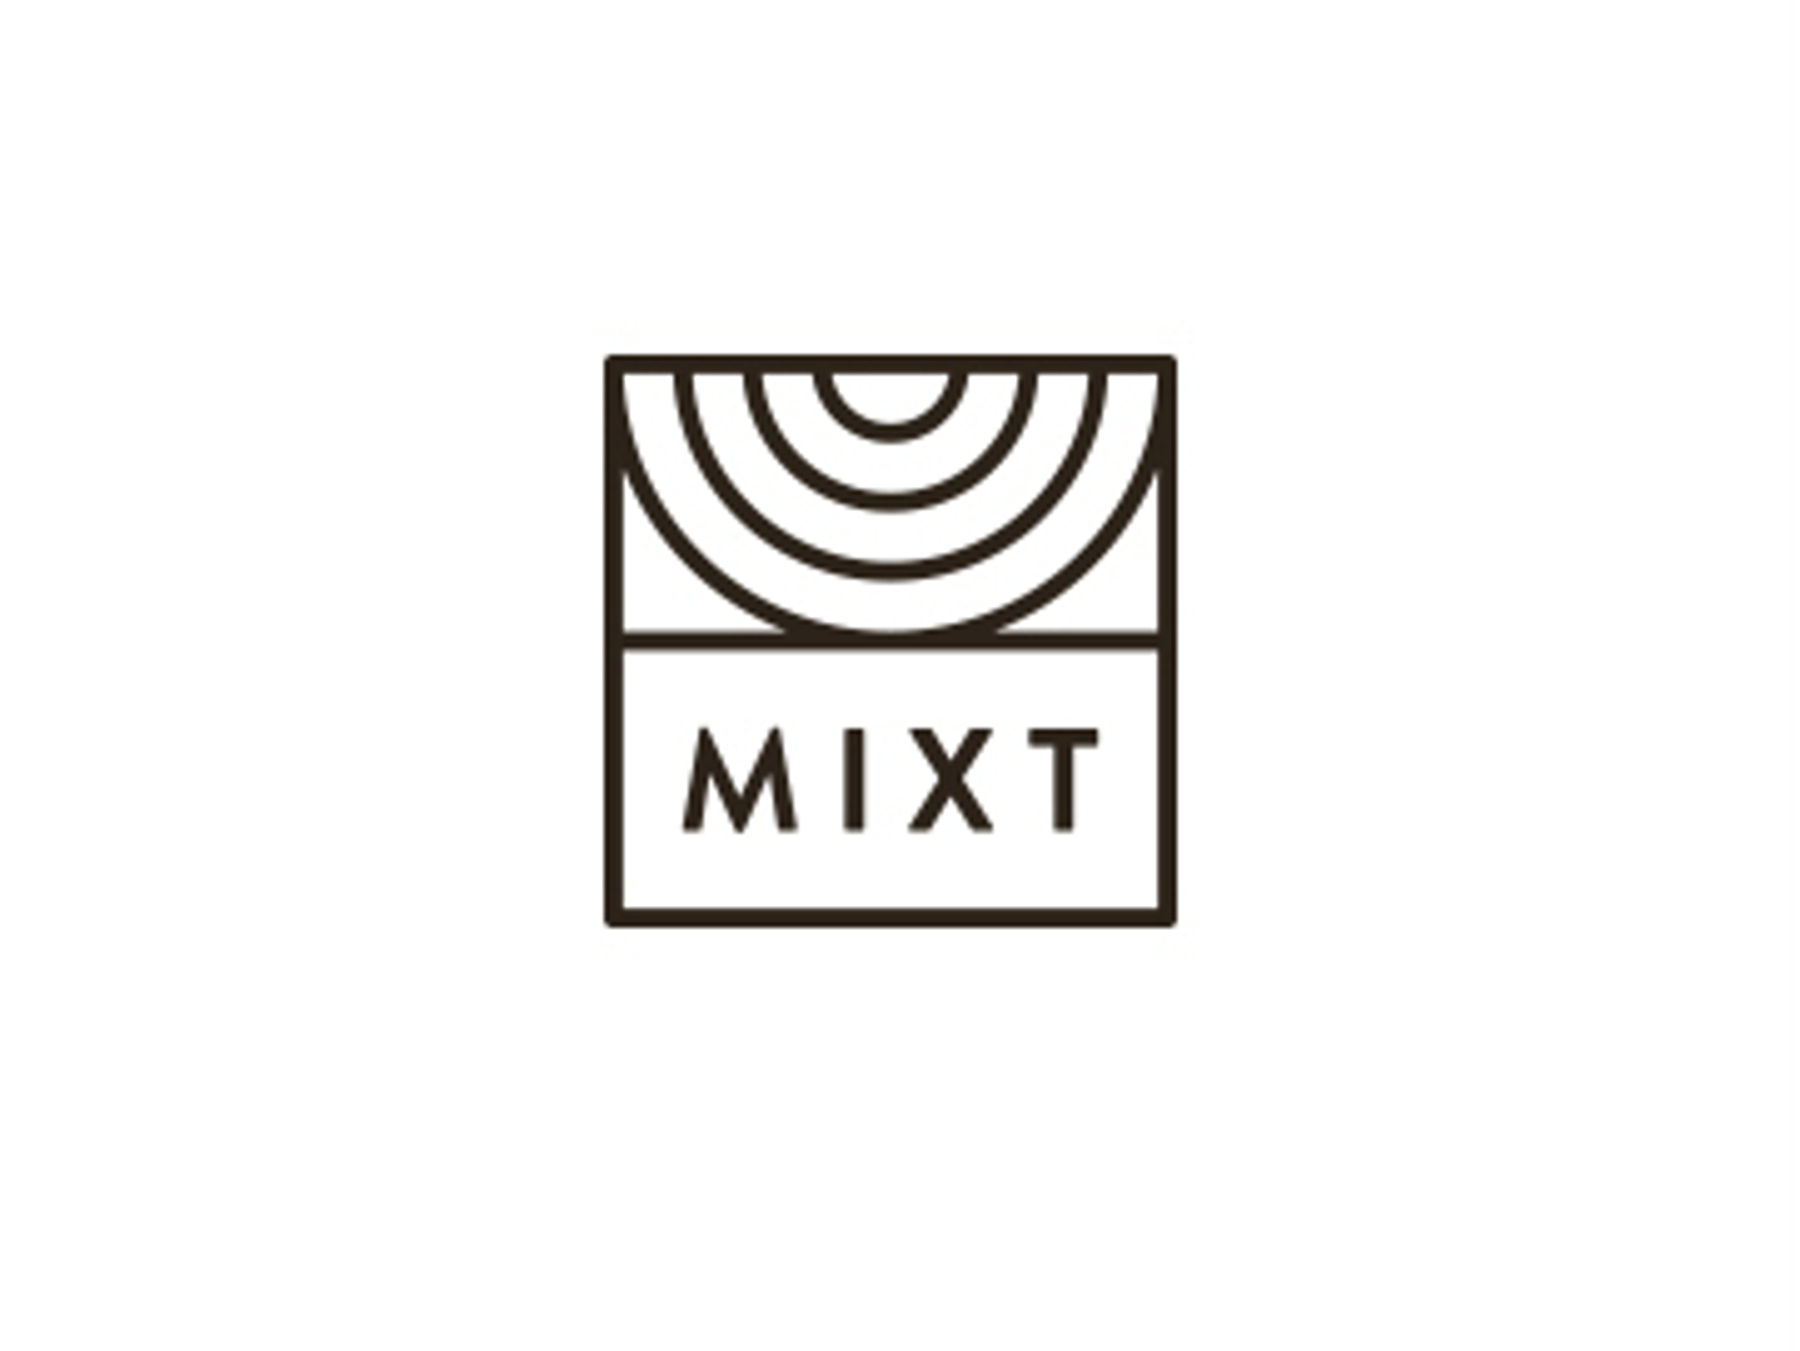 MIXT - 70 Mission St | Downtown San Francisco